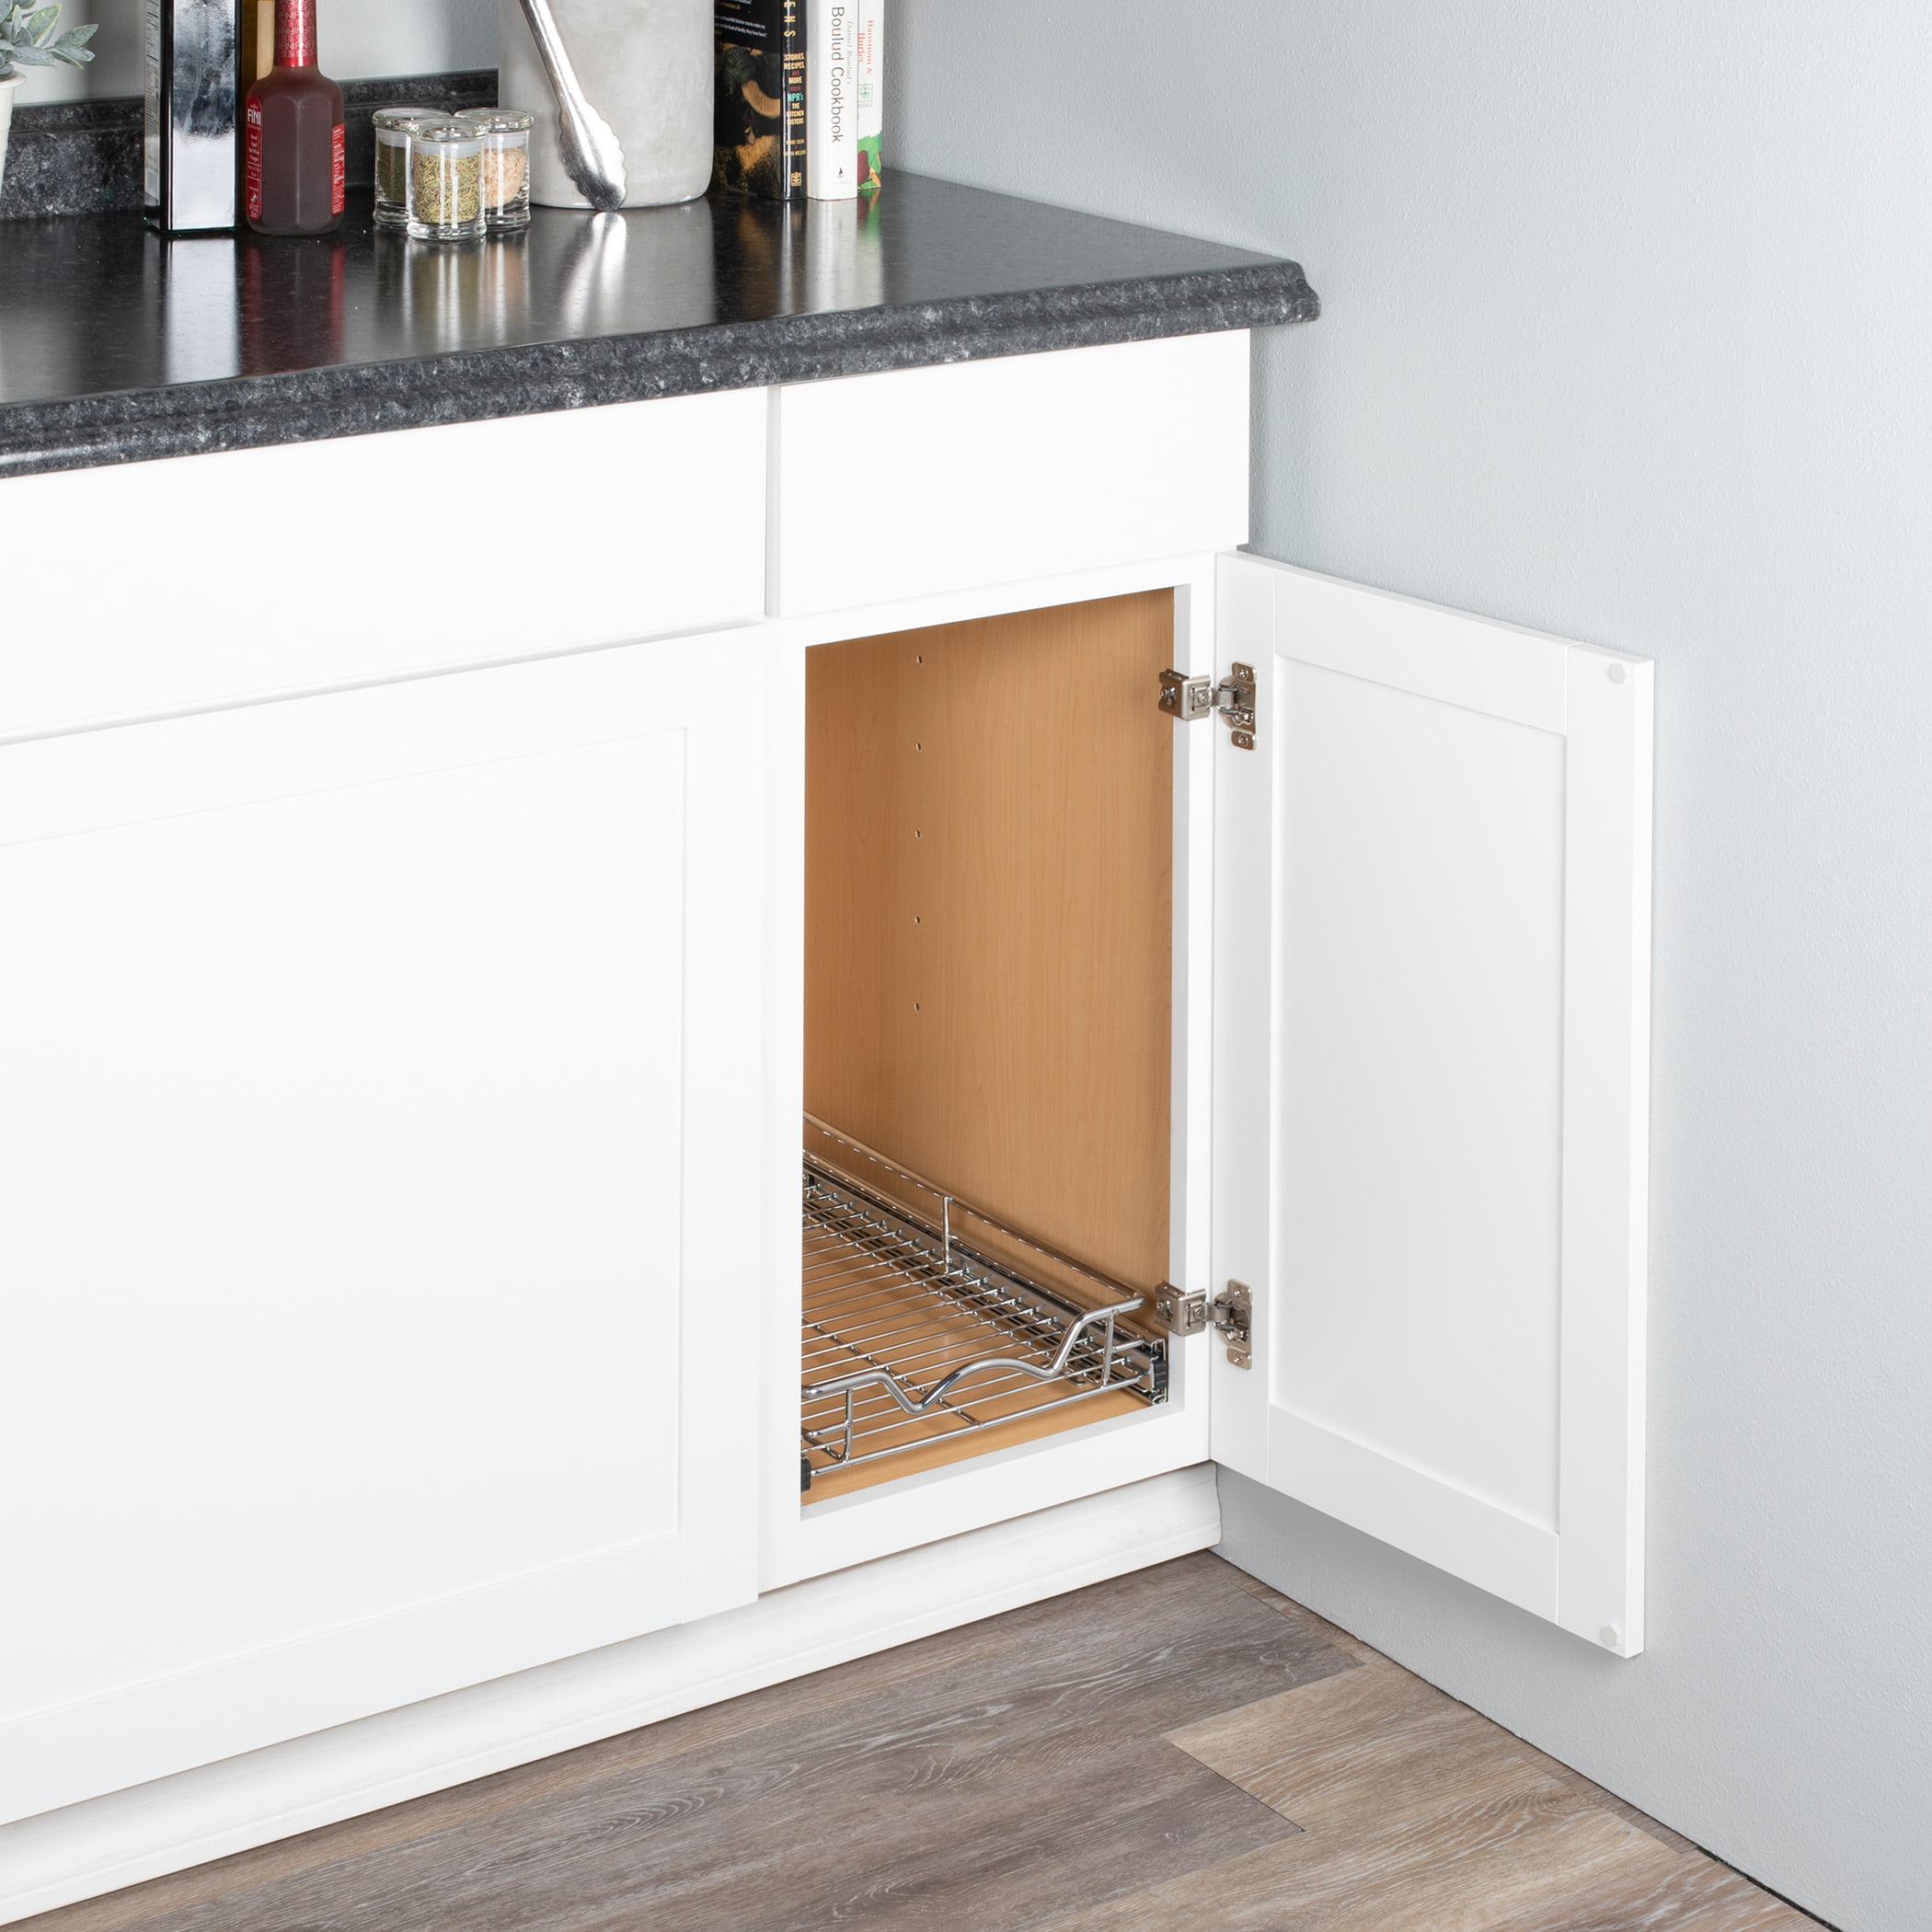 HOLDN’ STORAGE holdn storage pull out cabinet organizers